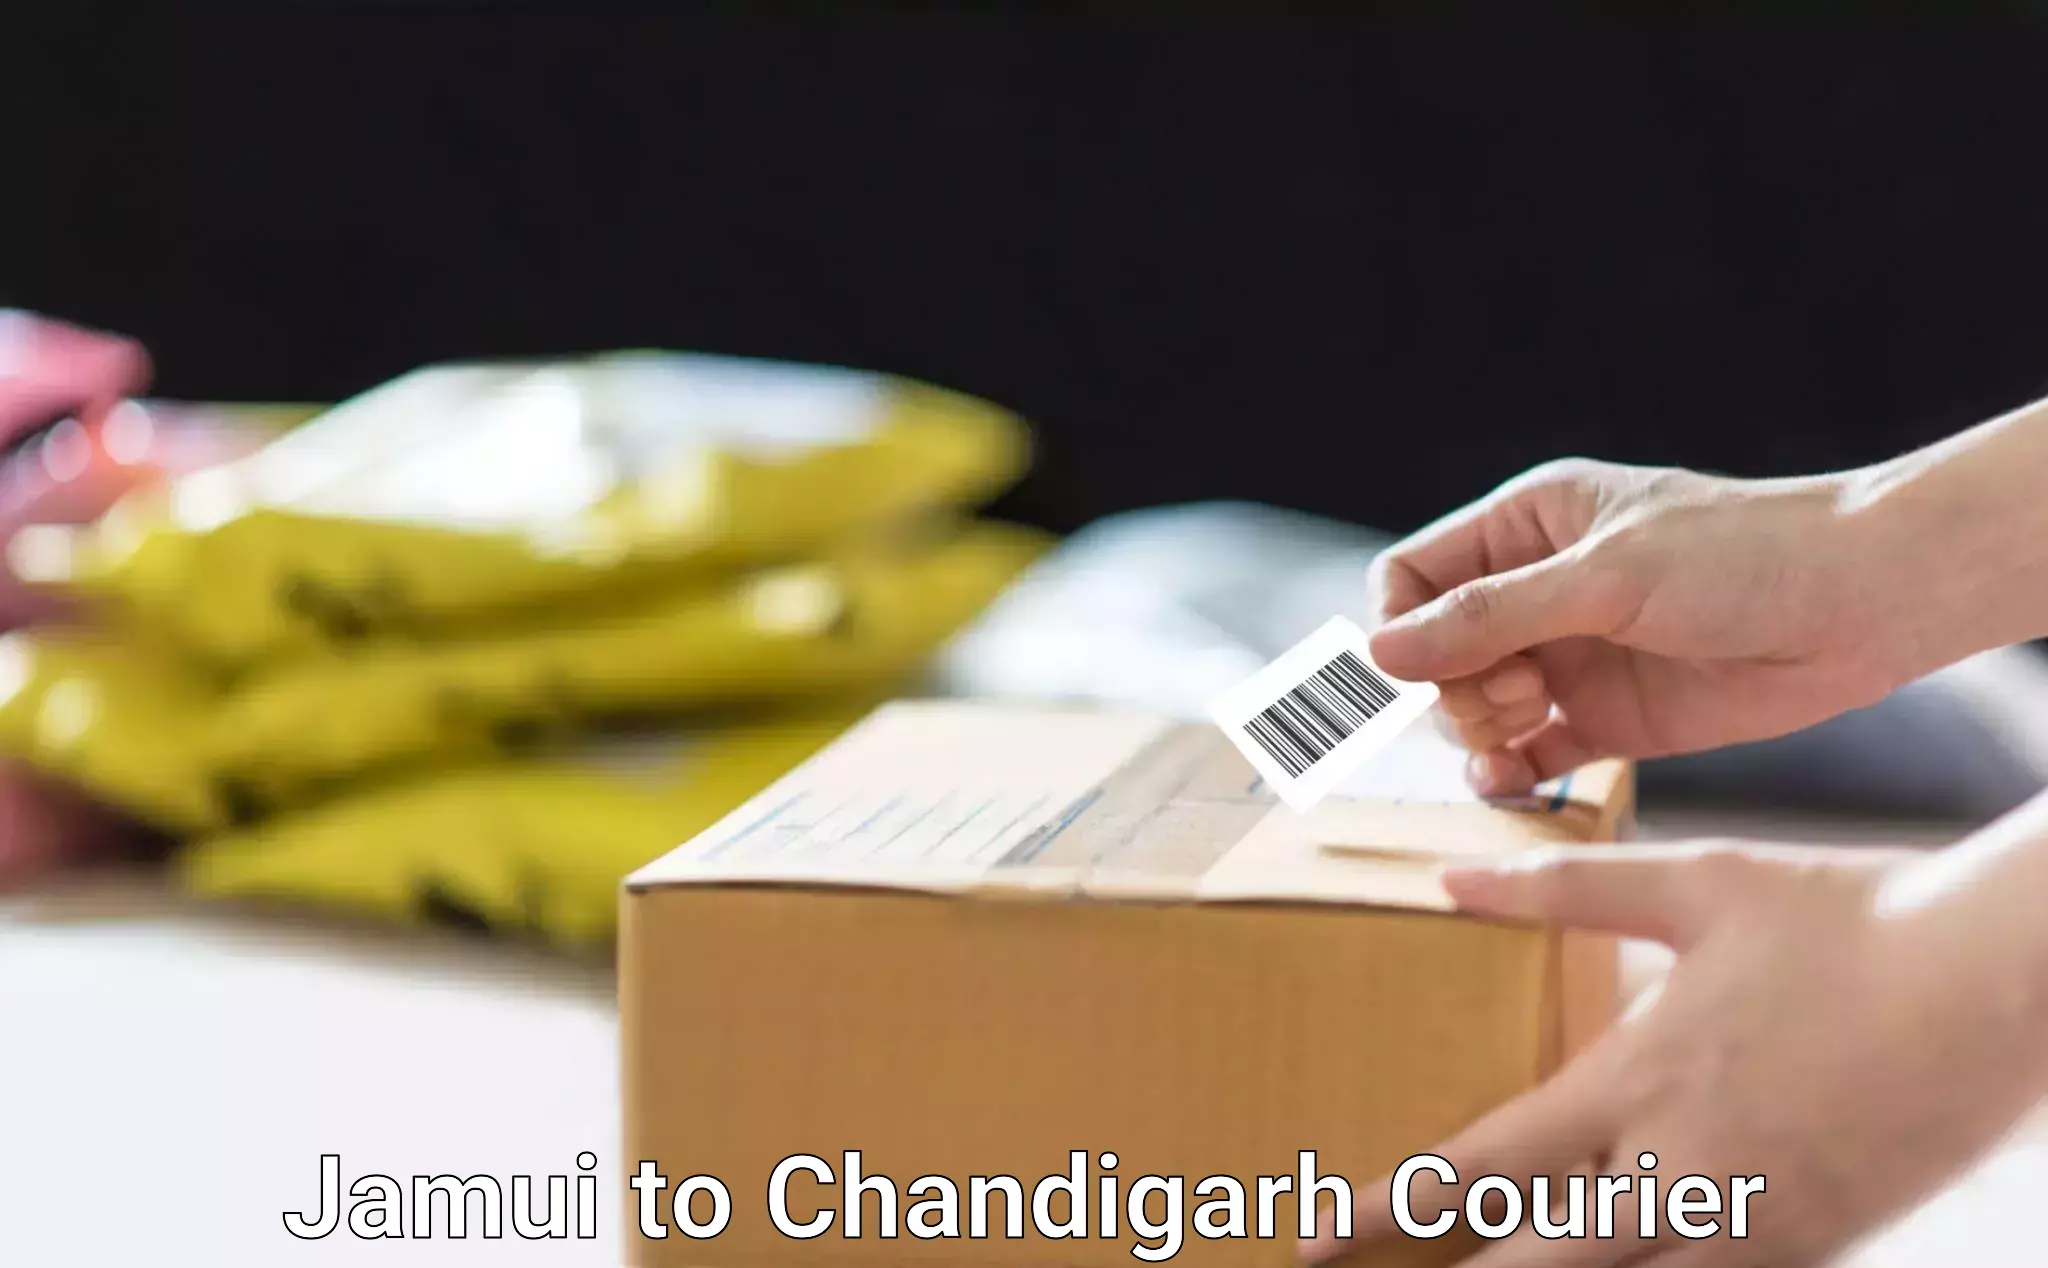 Professional moving assistance Jamui to Chandigarh